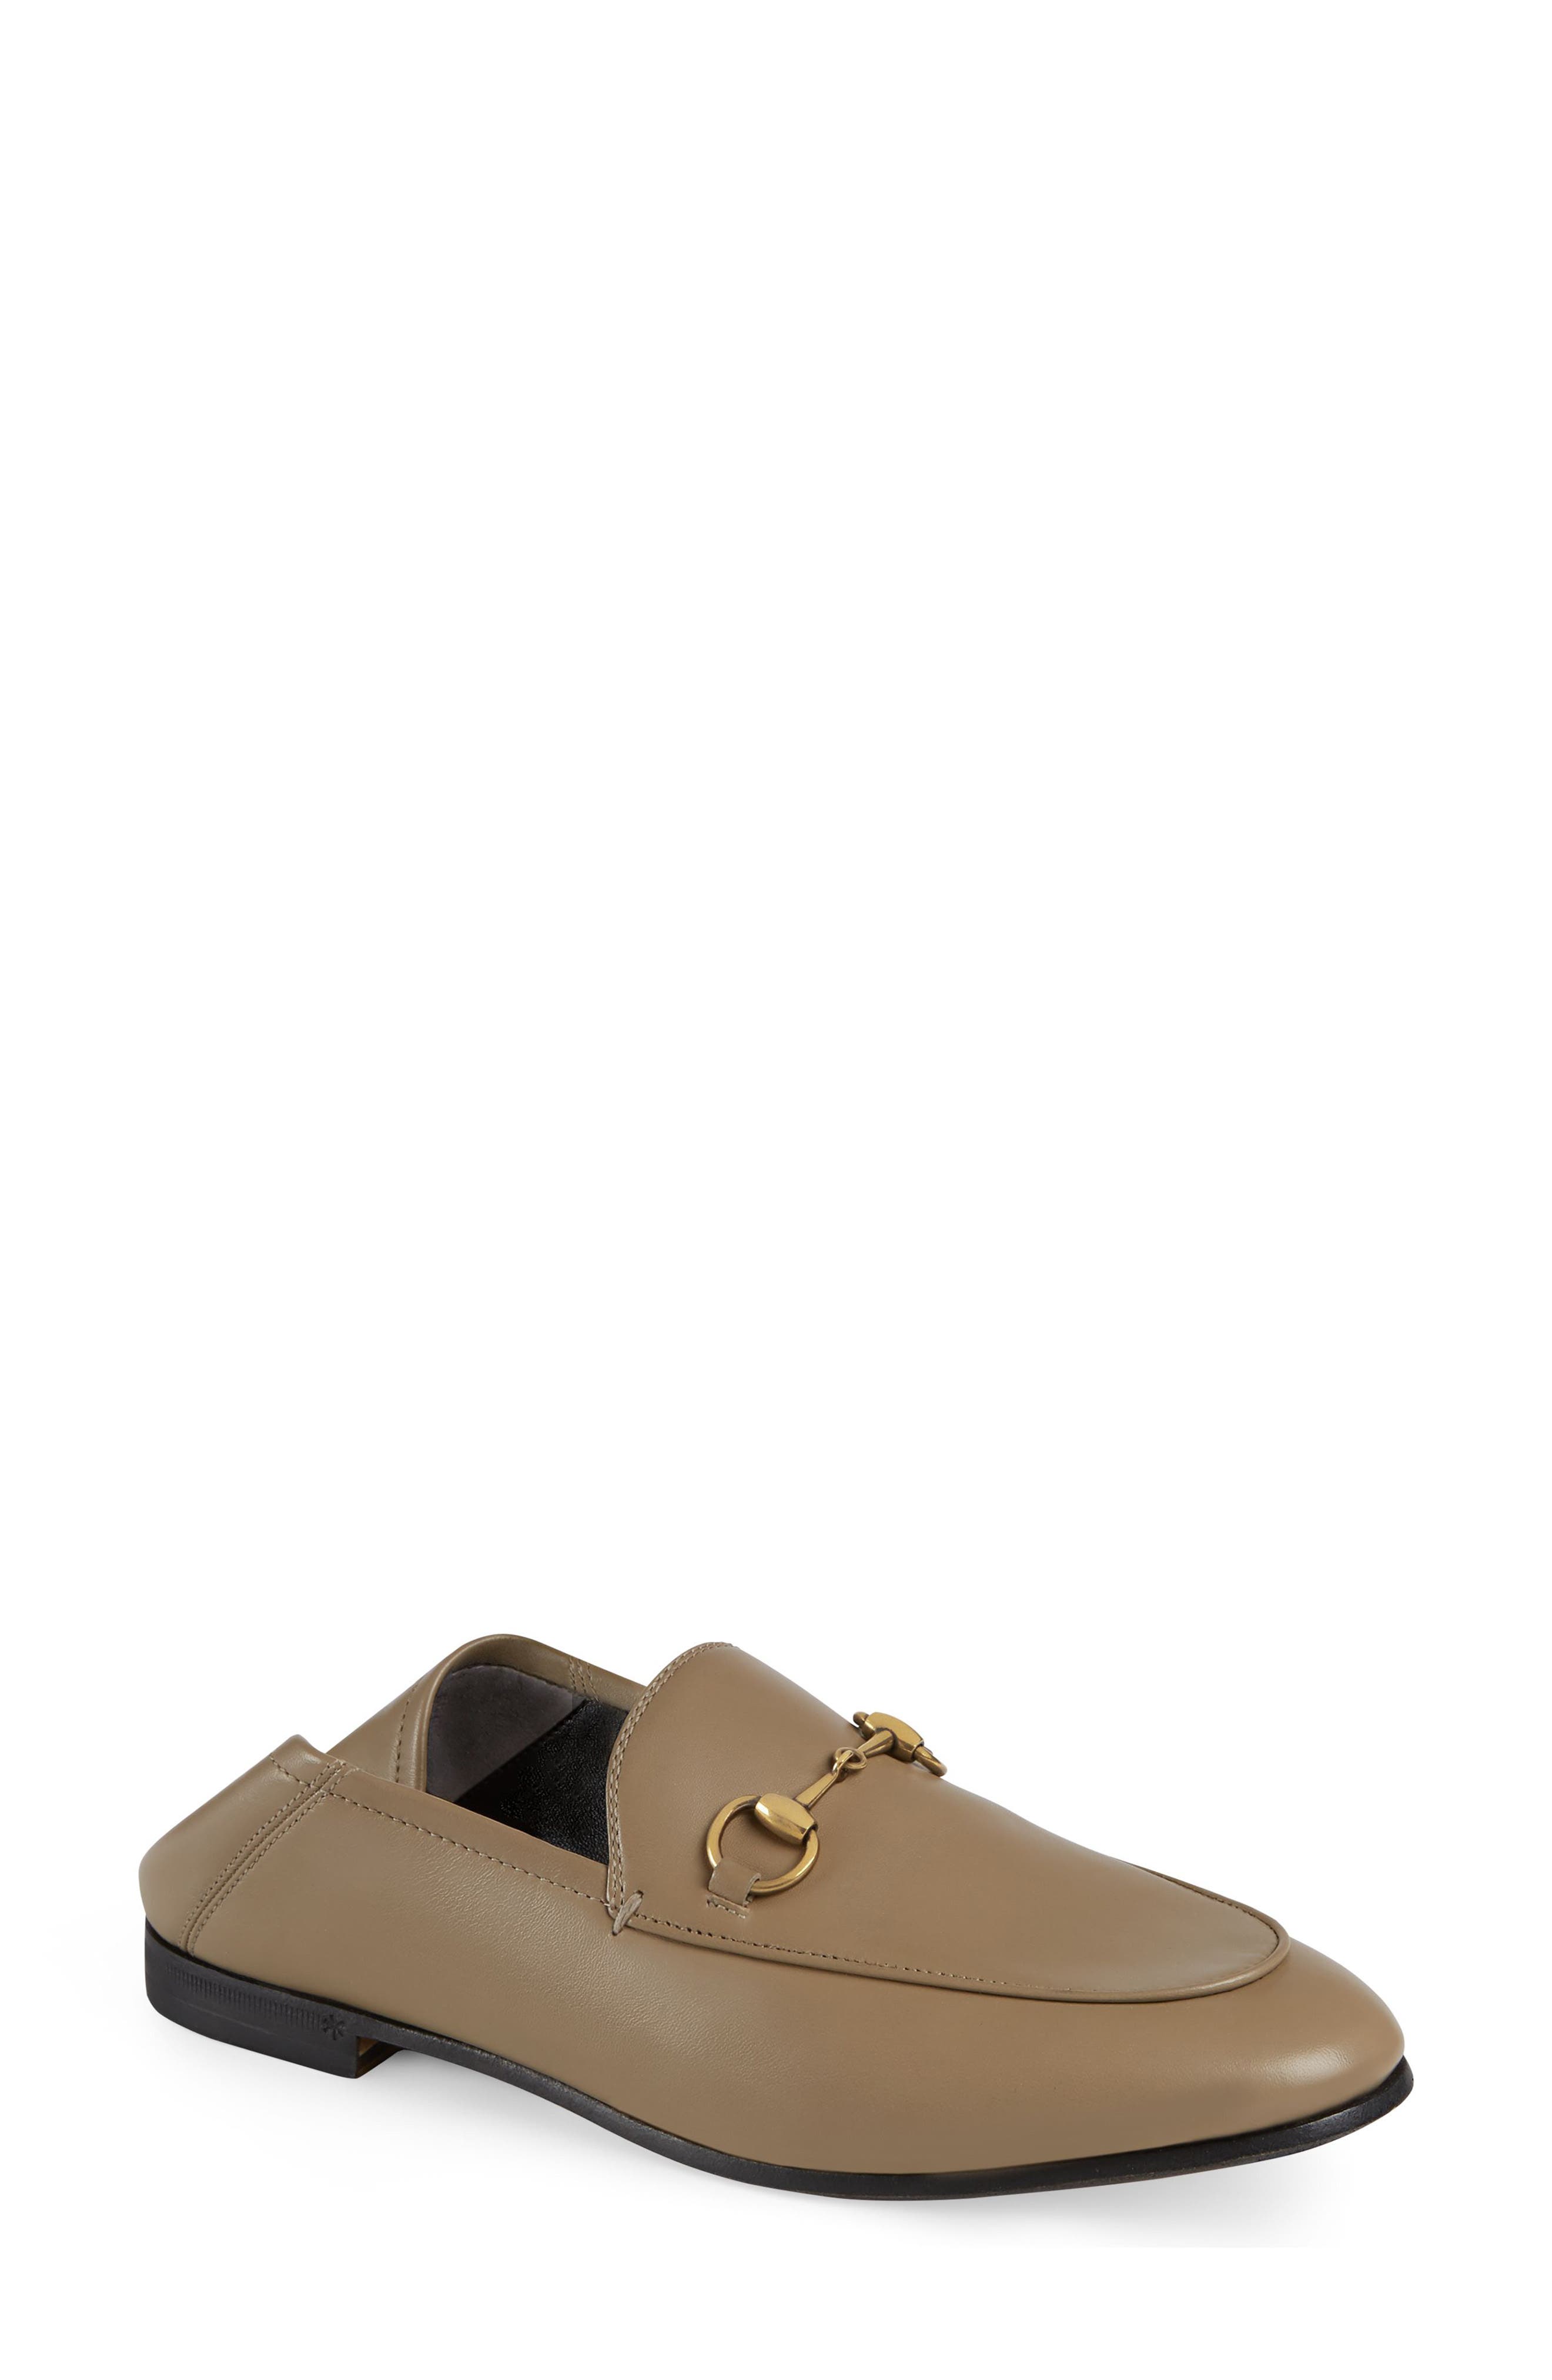 gucci loafers women price